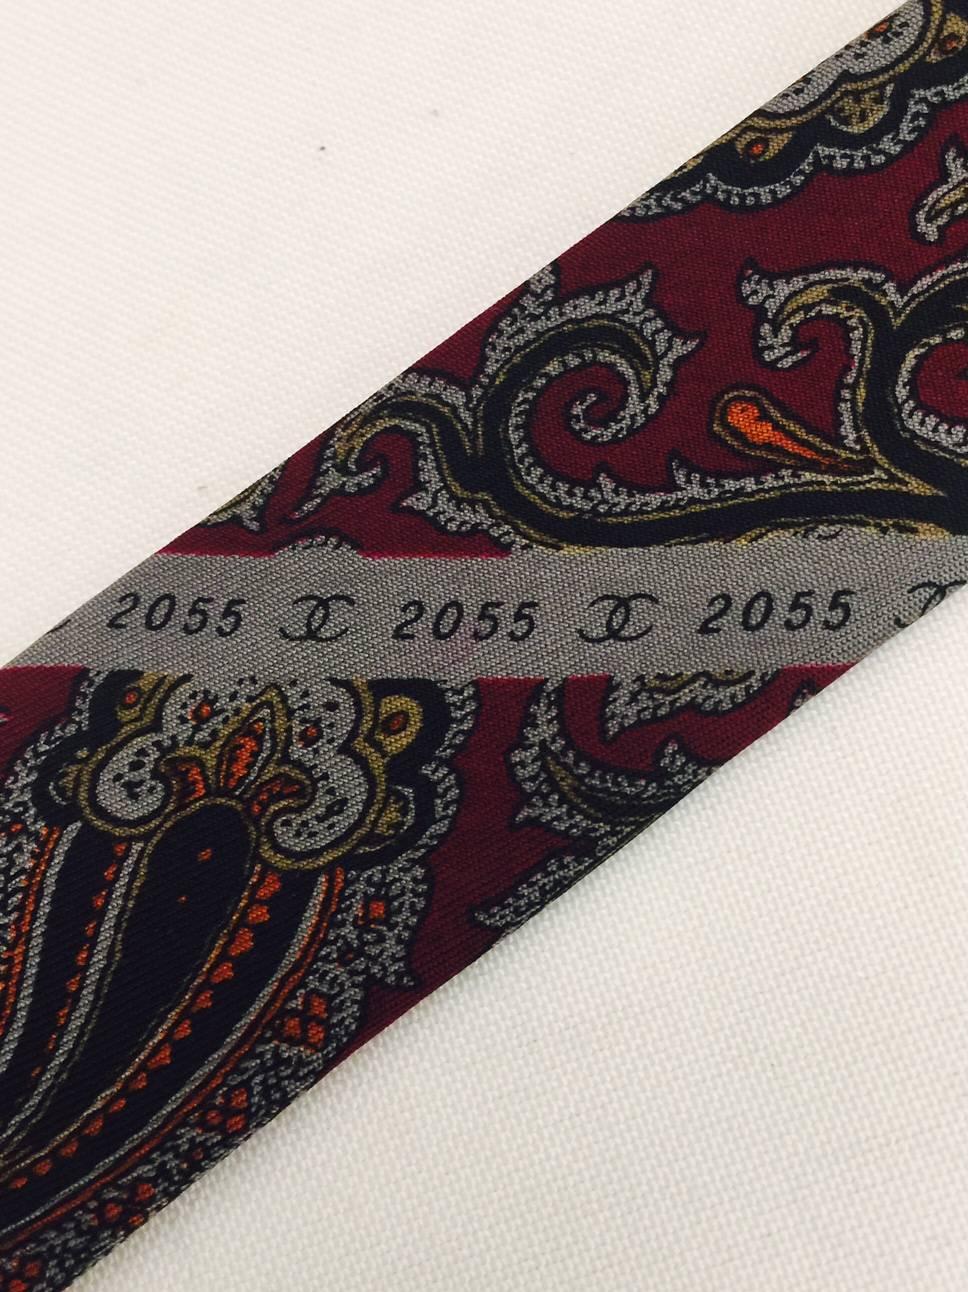 Black Clearly Chanel Multicolored Paisley Silk Tie on Burgundy Background